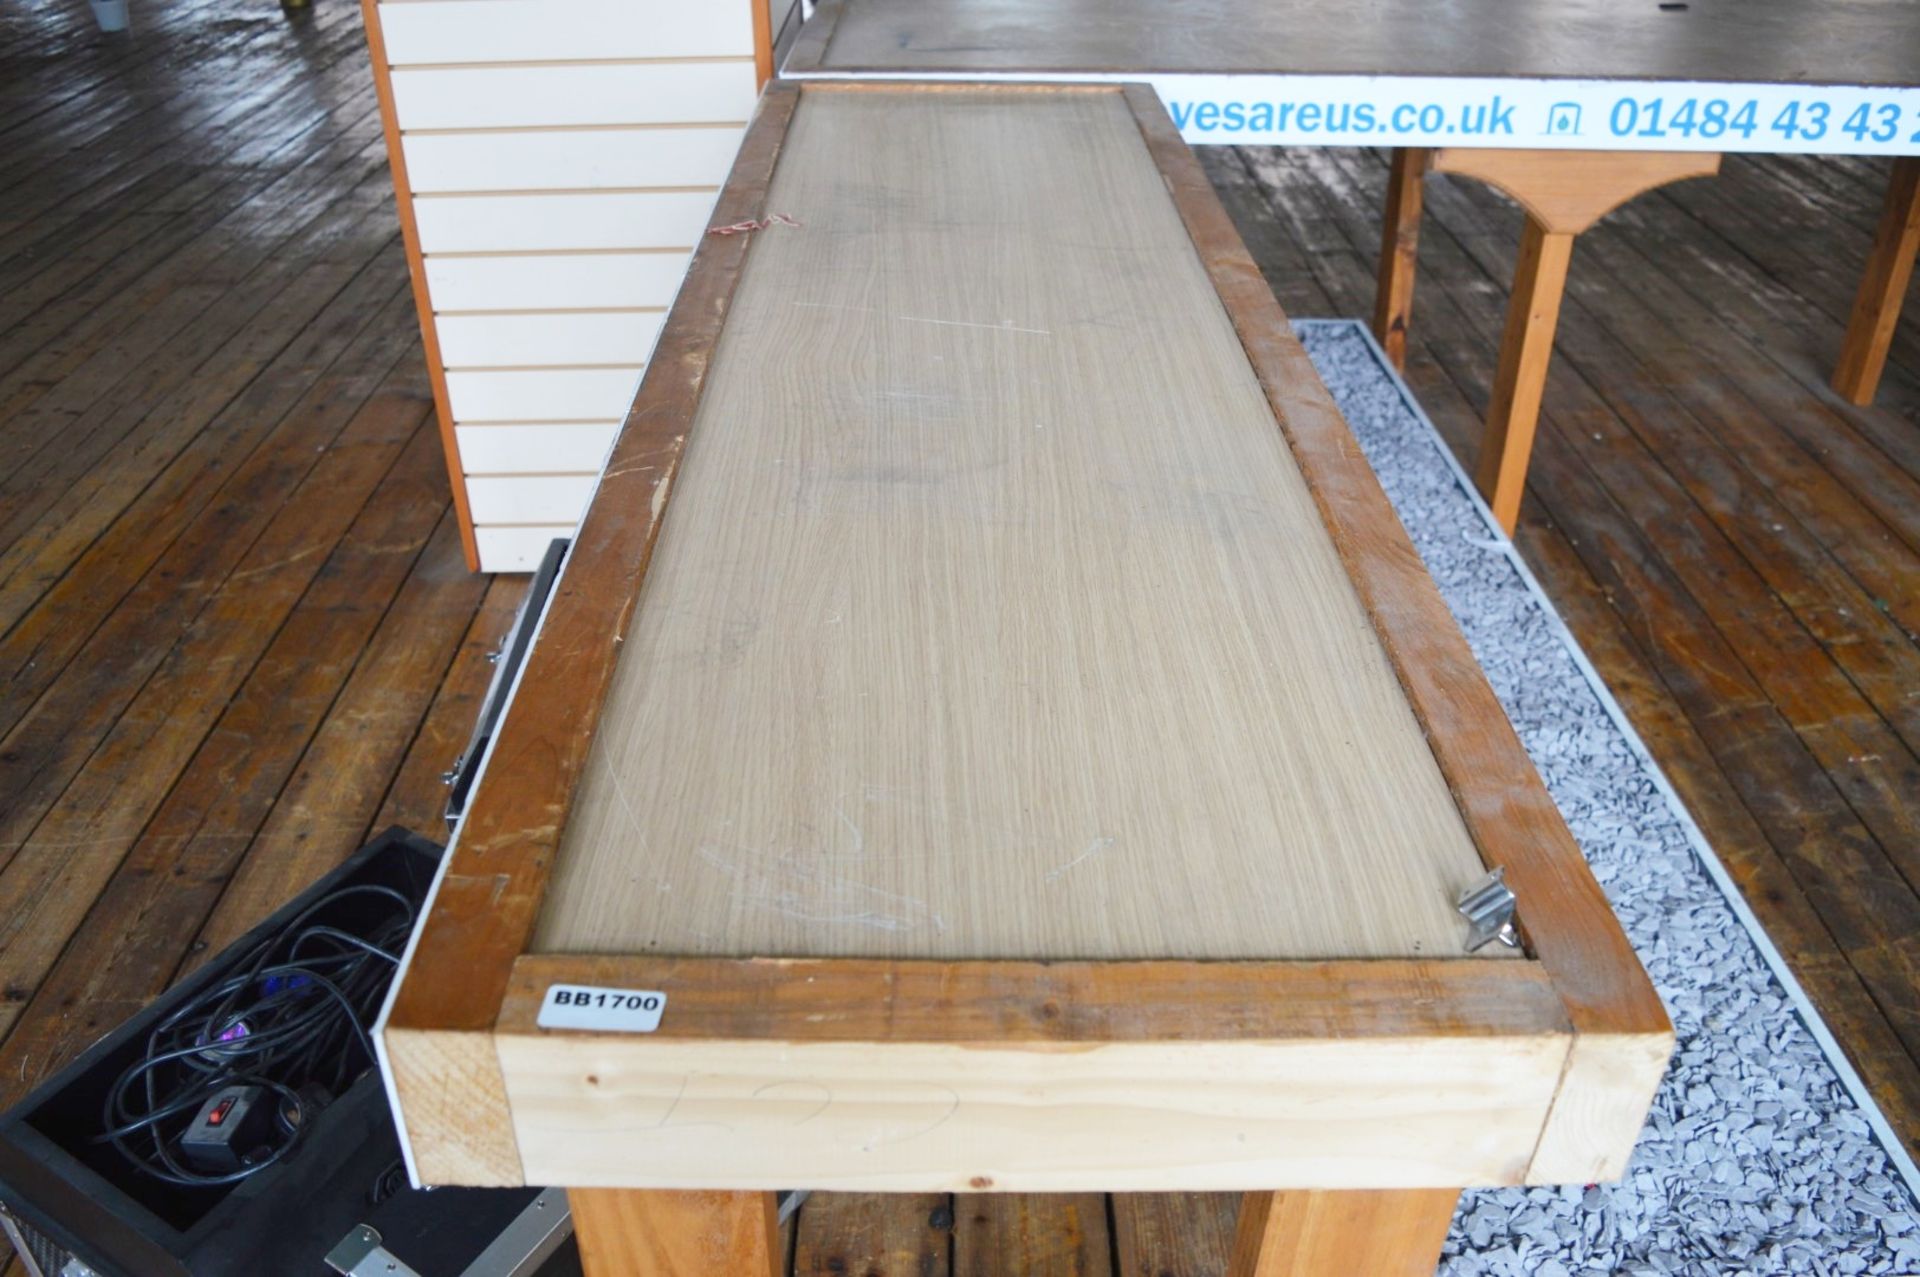 8 x Large Tables - Ideal For Exhibitions or Indoor Jumble Sales etc - Ref BB1700 - CL351 - Location: - Image 6 of 6